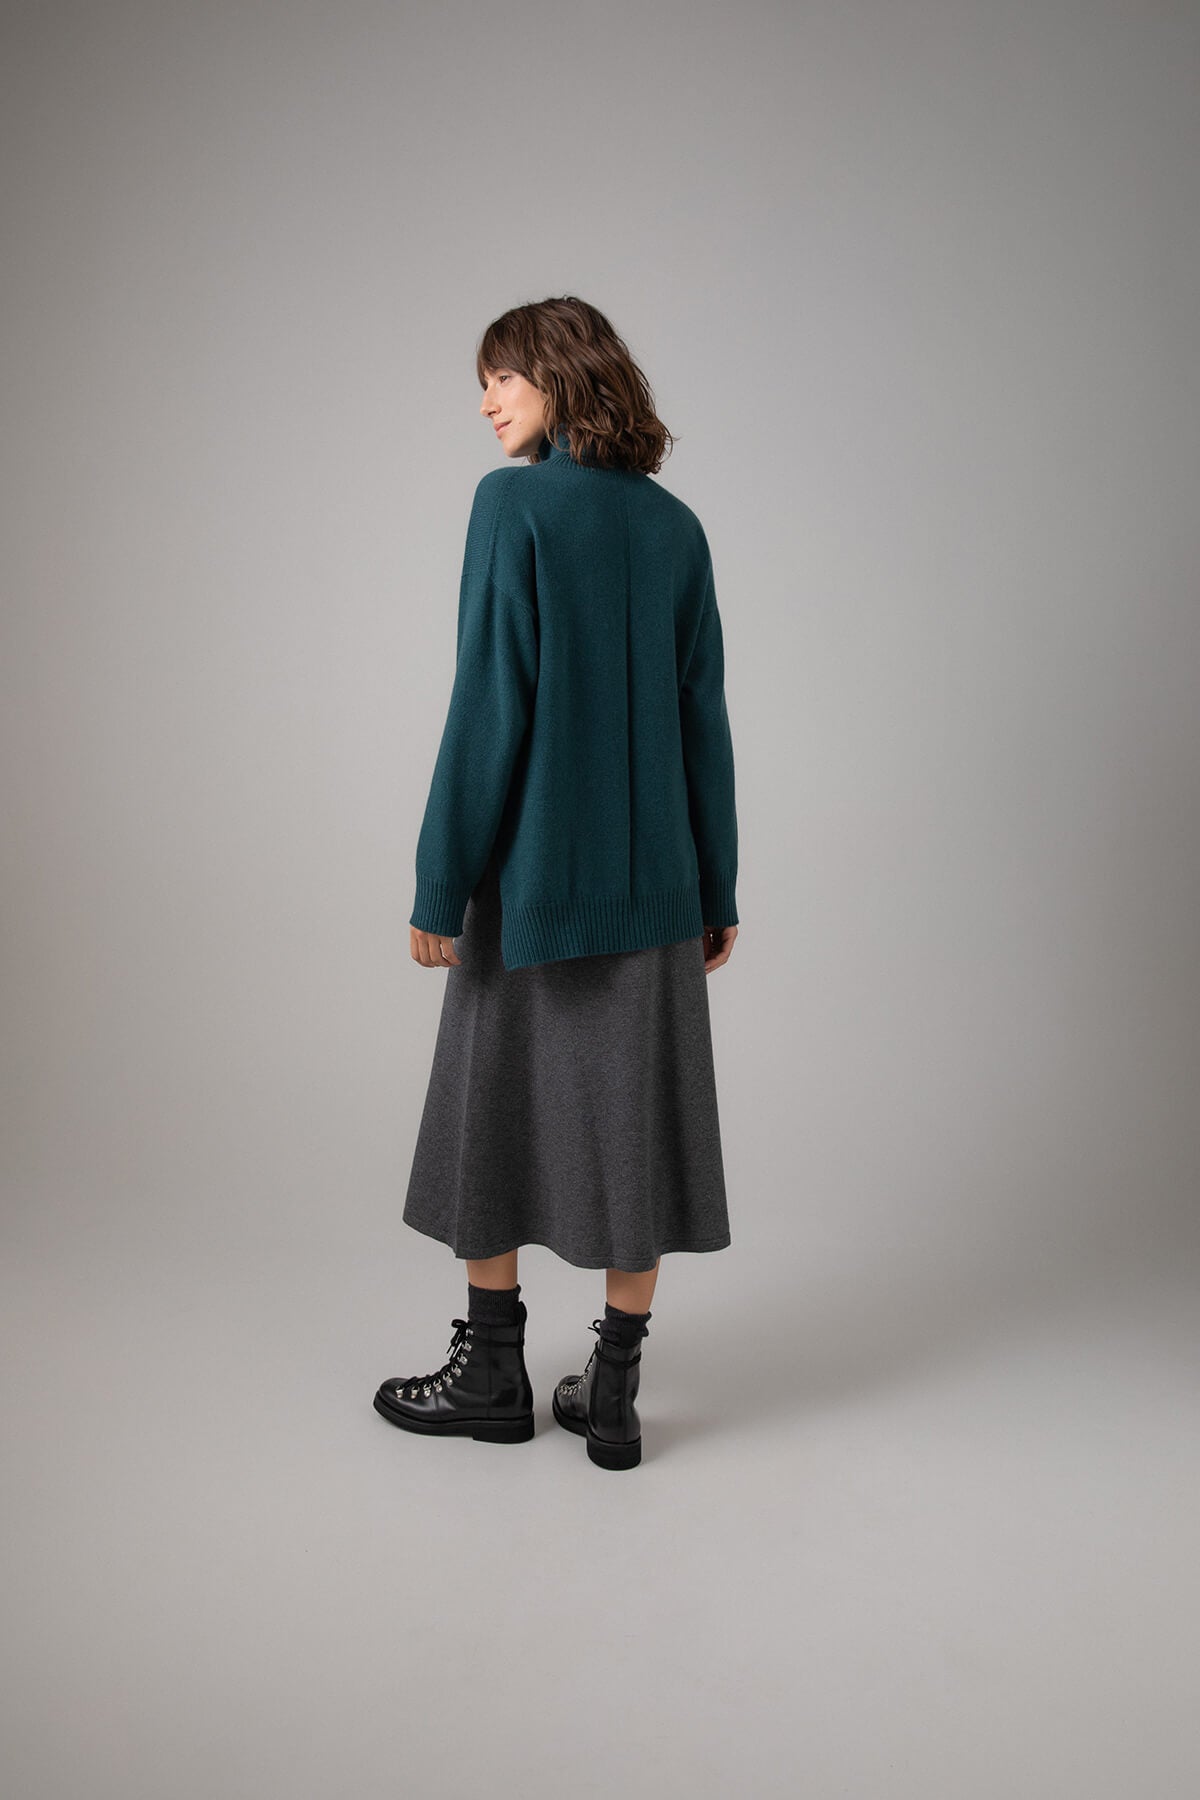 Back view of a Johnstons of Elgin Women's A-Line Cashmere Skirt in Mid Grey worn with a Mallard Roll Neck Sweater on a grey background KAP05097HA4181